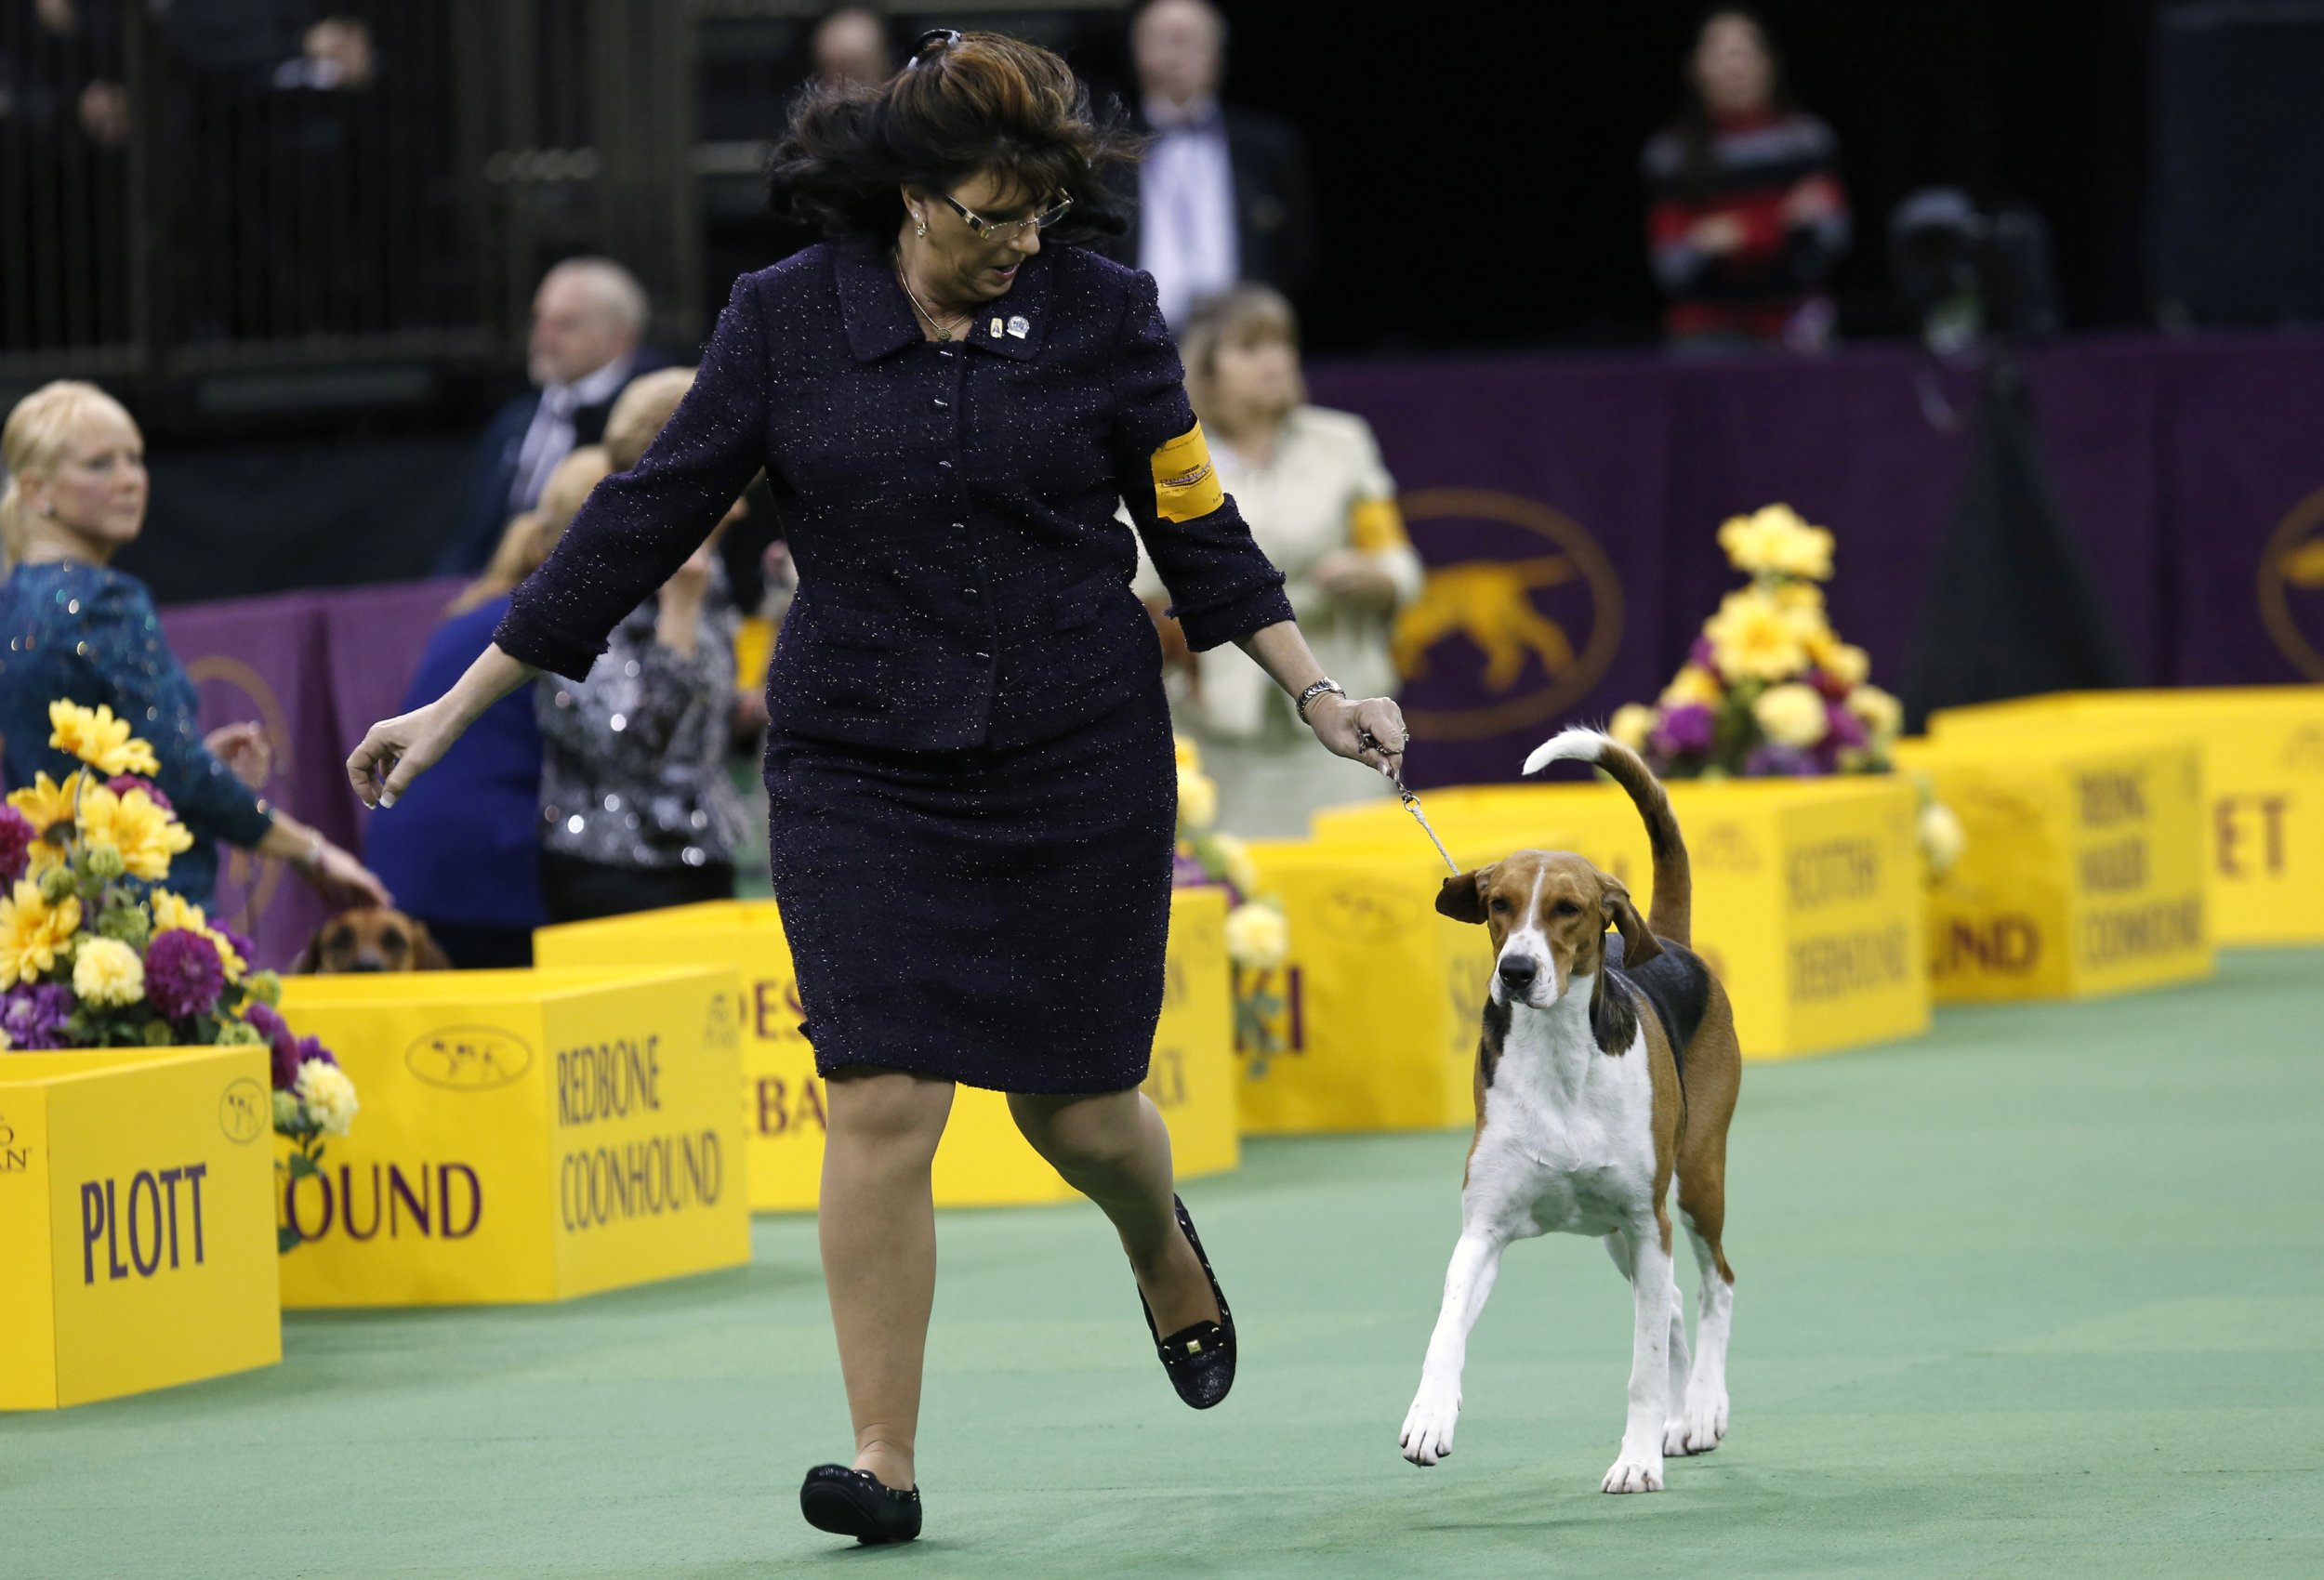 National Dog Show 2014 When And Where To Watch On TV, Live Stream For